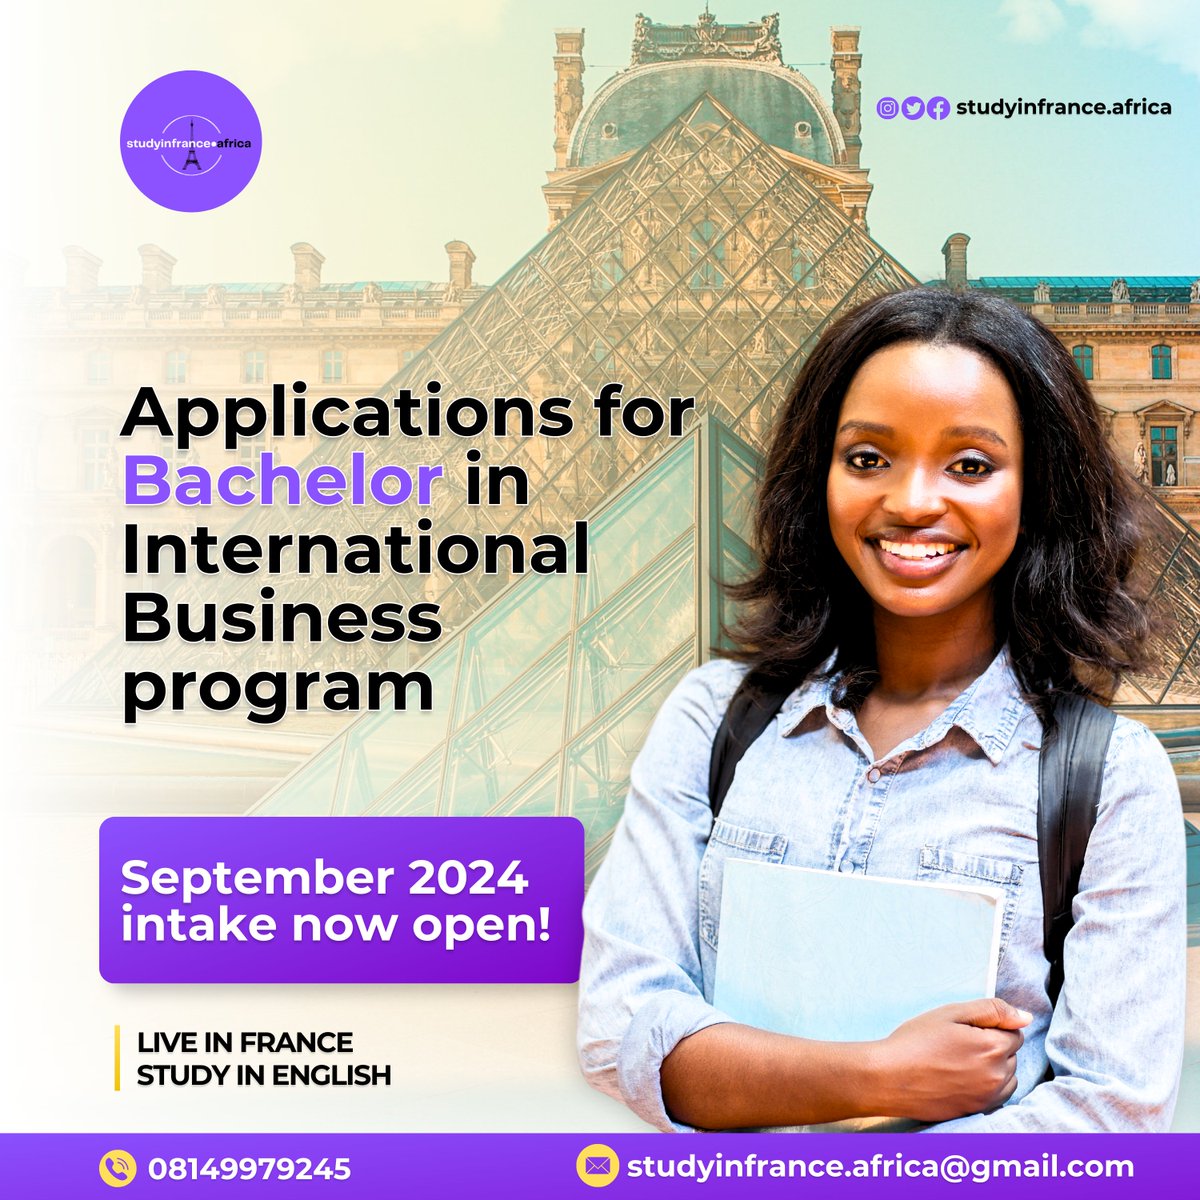 Applications are now OPEN for our Bachelor in International Business program.  Don't miss this chance to start your extraordinary learning journey in France🇫🇷

From tech to finance, we've got you covered. Book your consultation session now!

#StudyinFrance2024